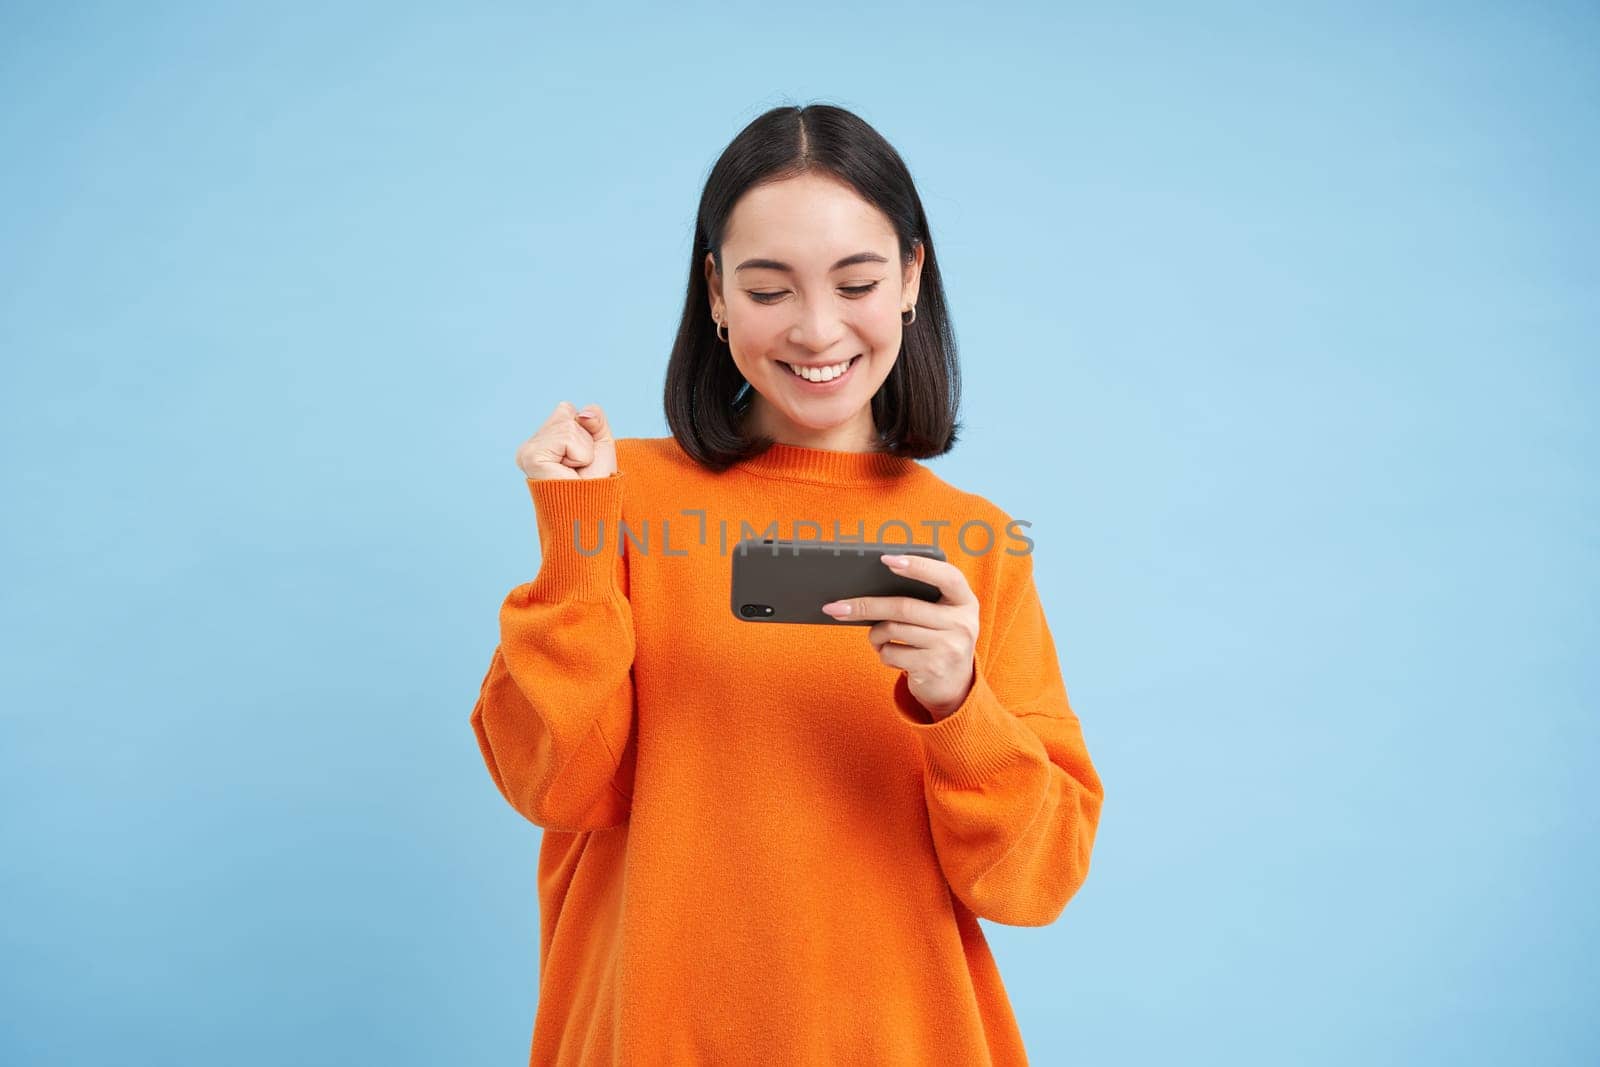 Happy korean girl winning on mobile phone video game, holding cellphone and celebrating, achieve goal in app, standing over blue background.